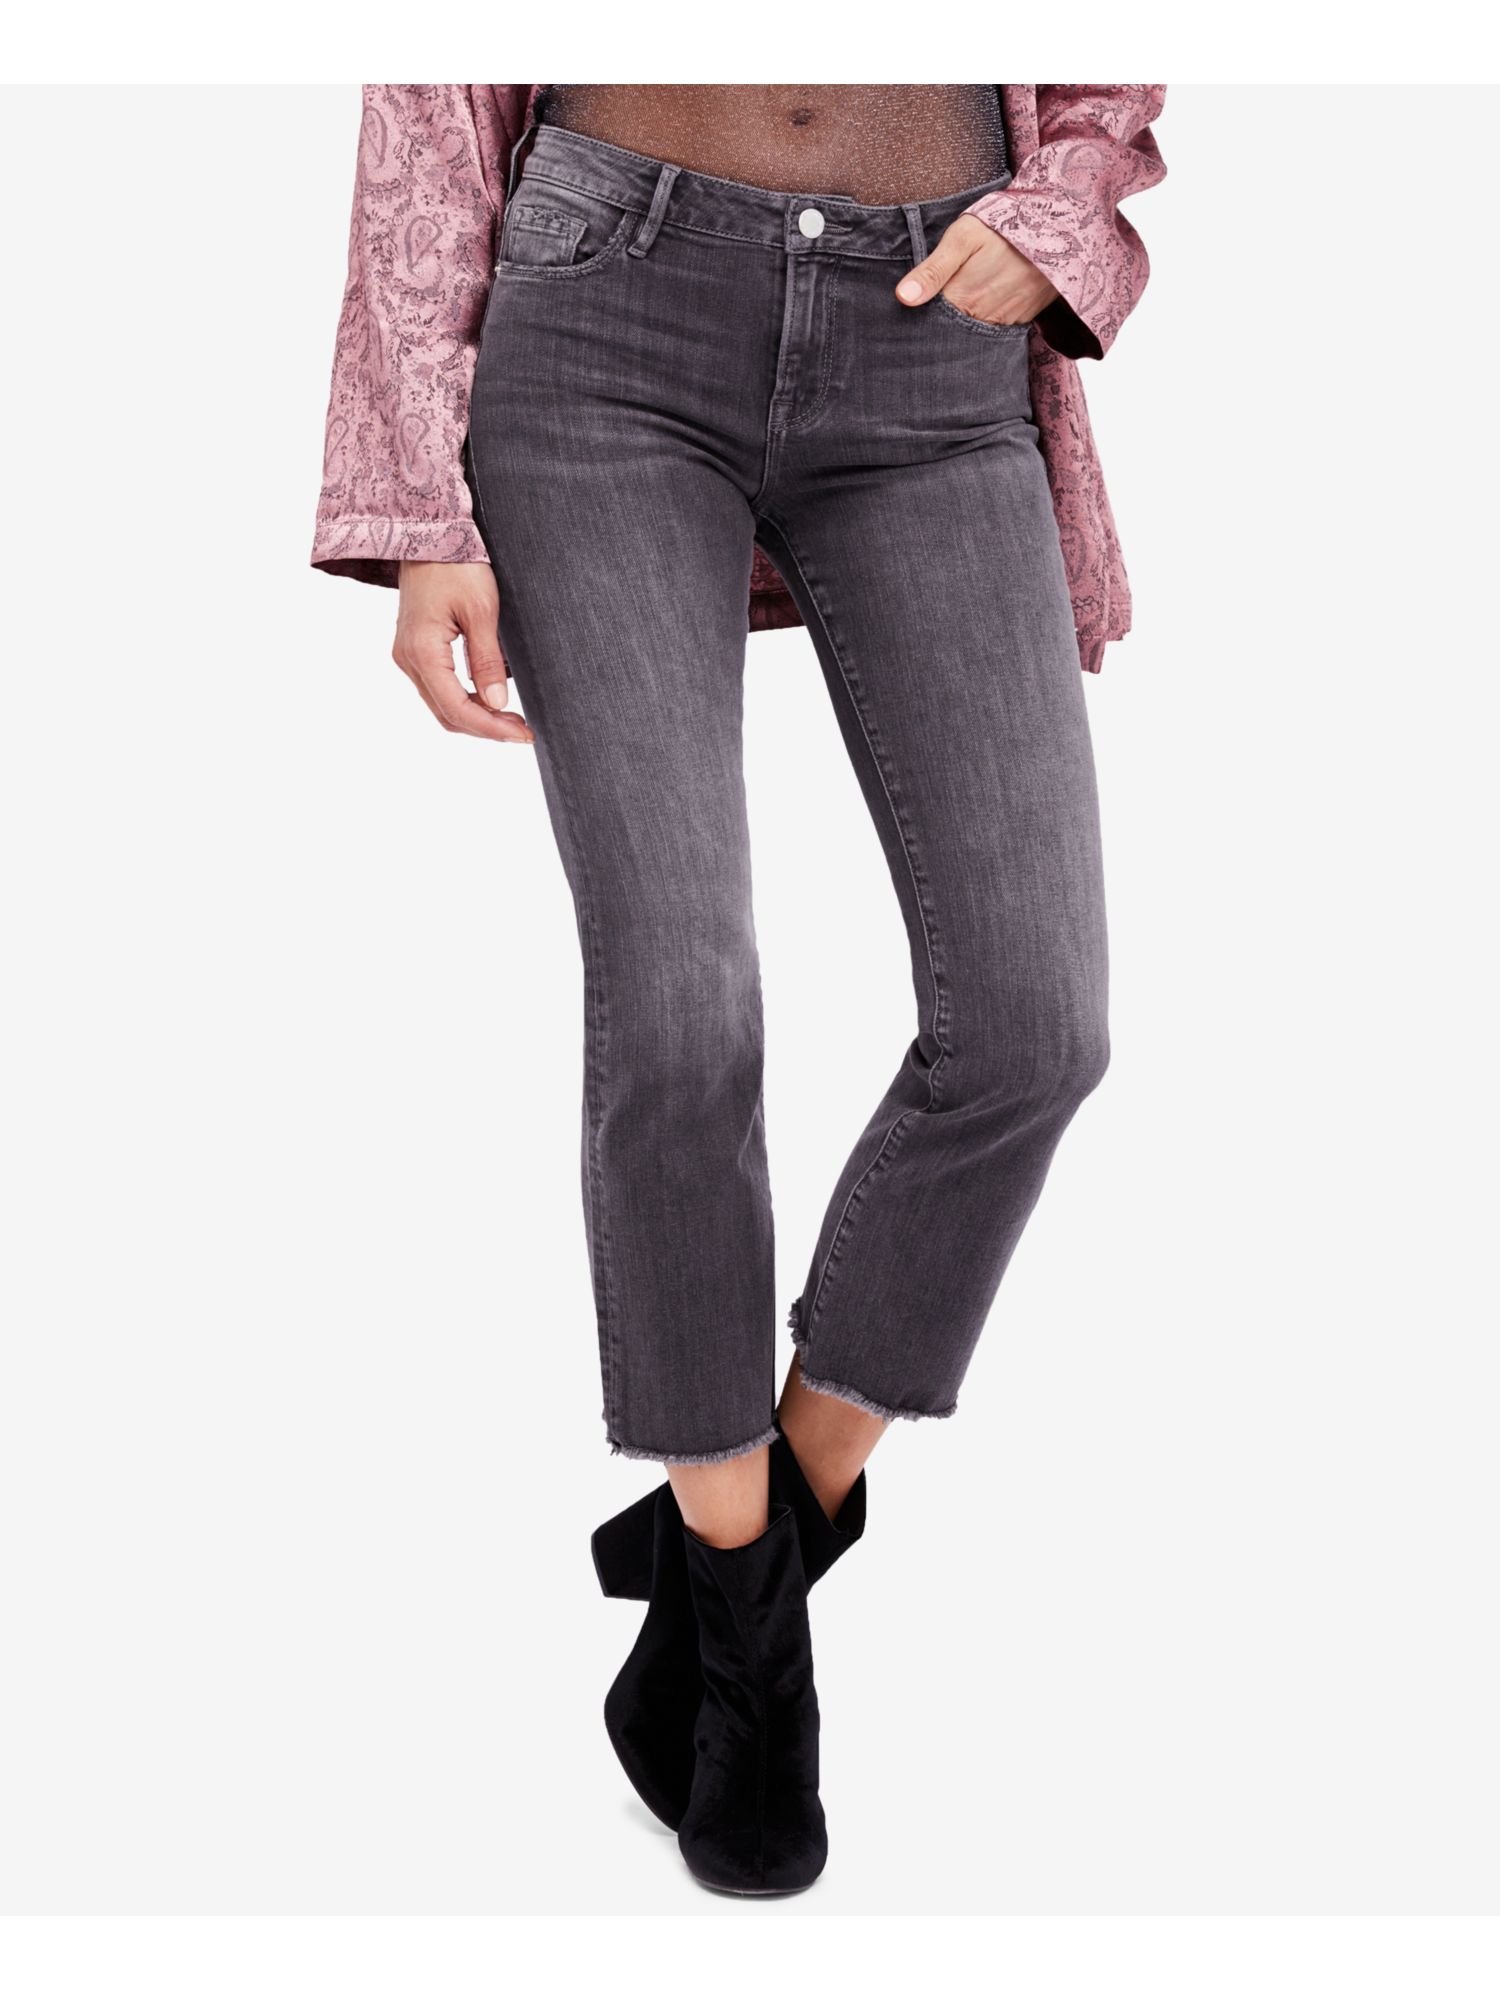 FREE PEOPLE $78 Womens 1052 Black Zippered Pocketed Frayed Skinny Jeans 24 WAIST - image 1 of 4